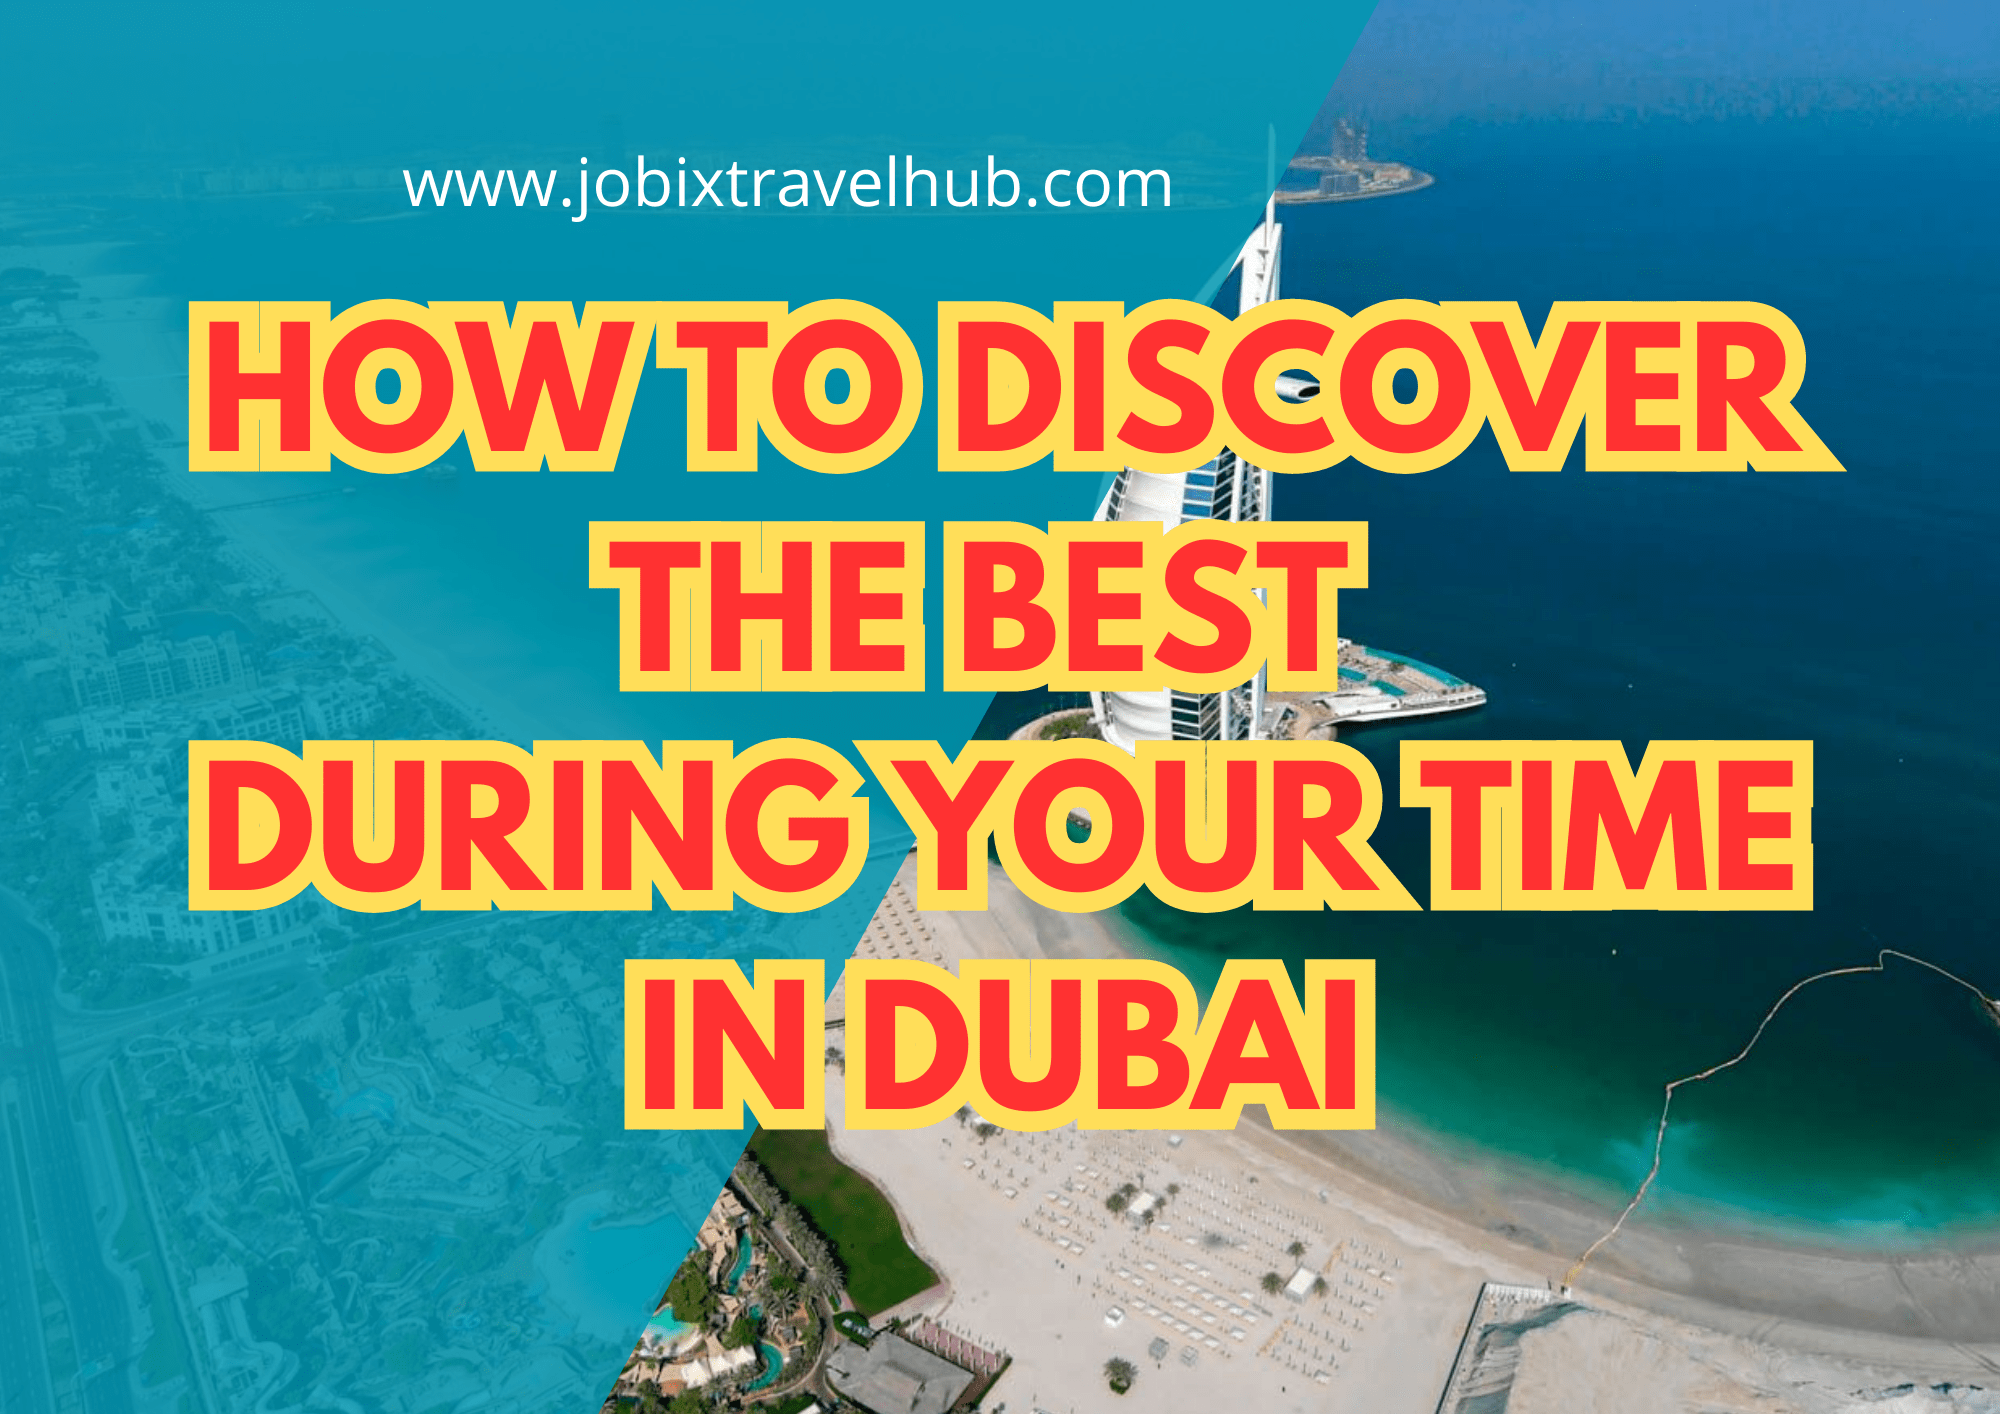 Are you looking for a combination of luxurious desert vibes with modern sophistication? In that case, spending your time in Dubai for vacation is best!